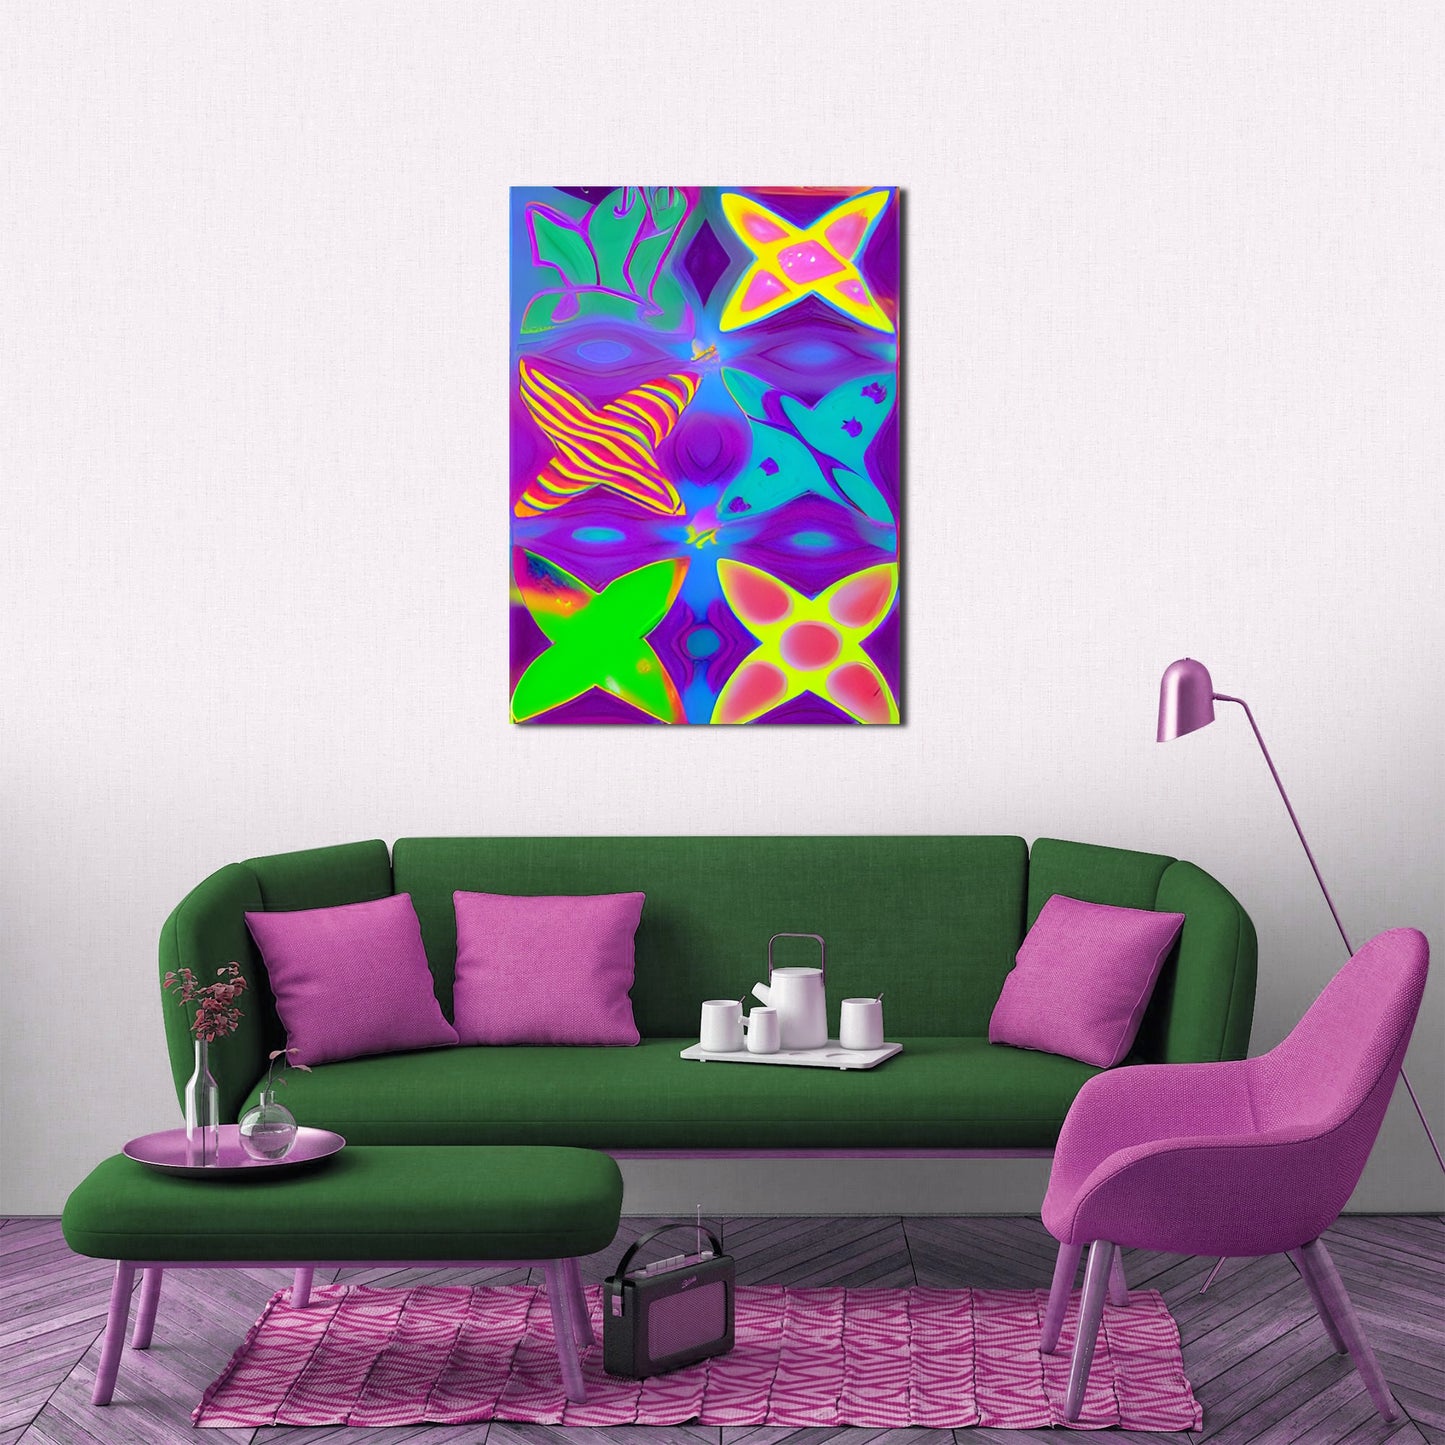 Rainbow Chaos Abstraction Indie Aesthetic Metal Poster